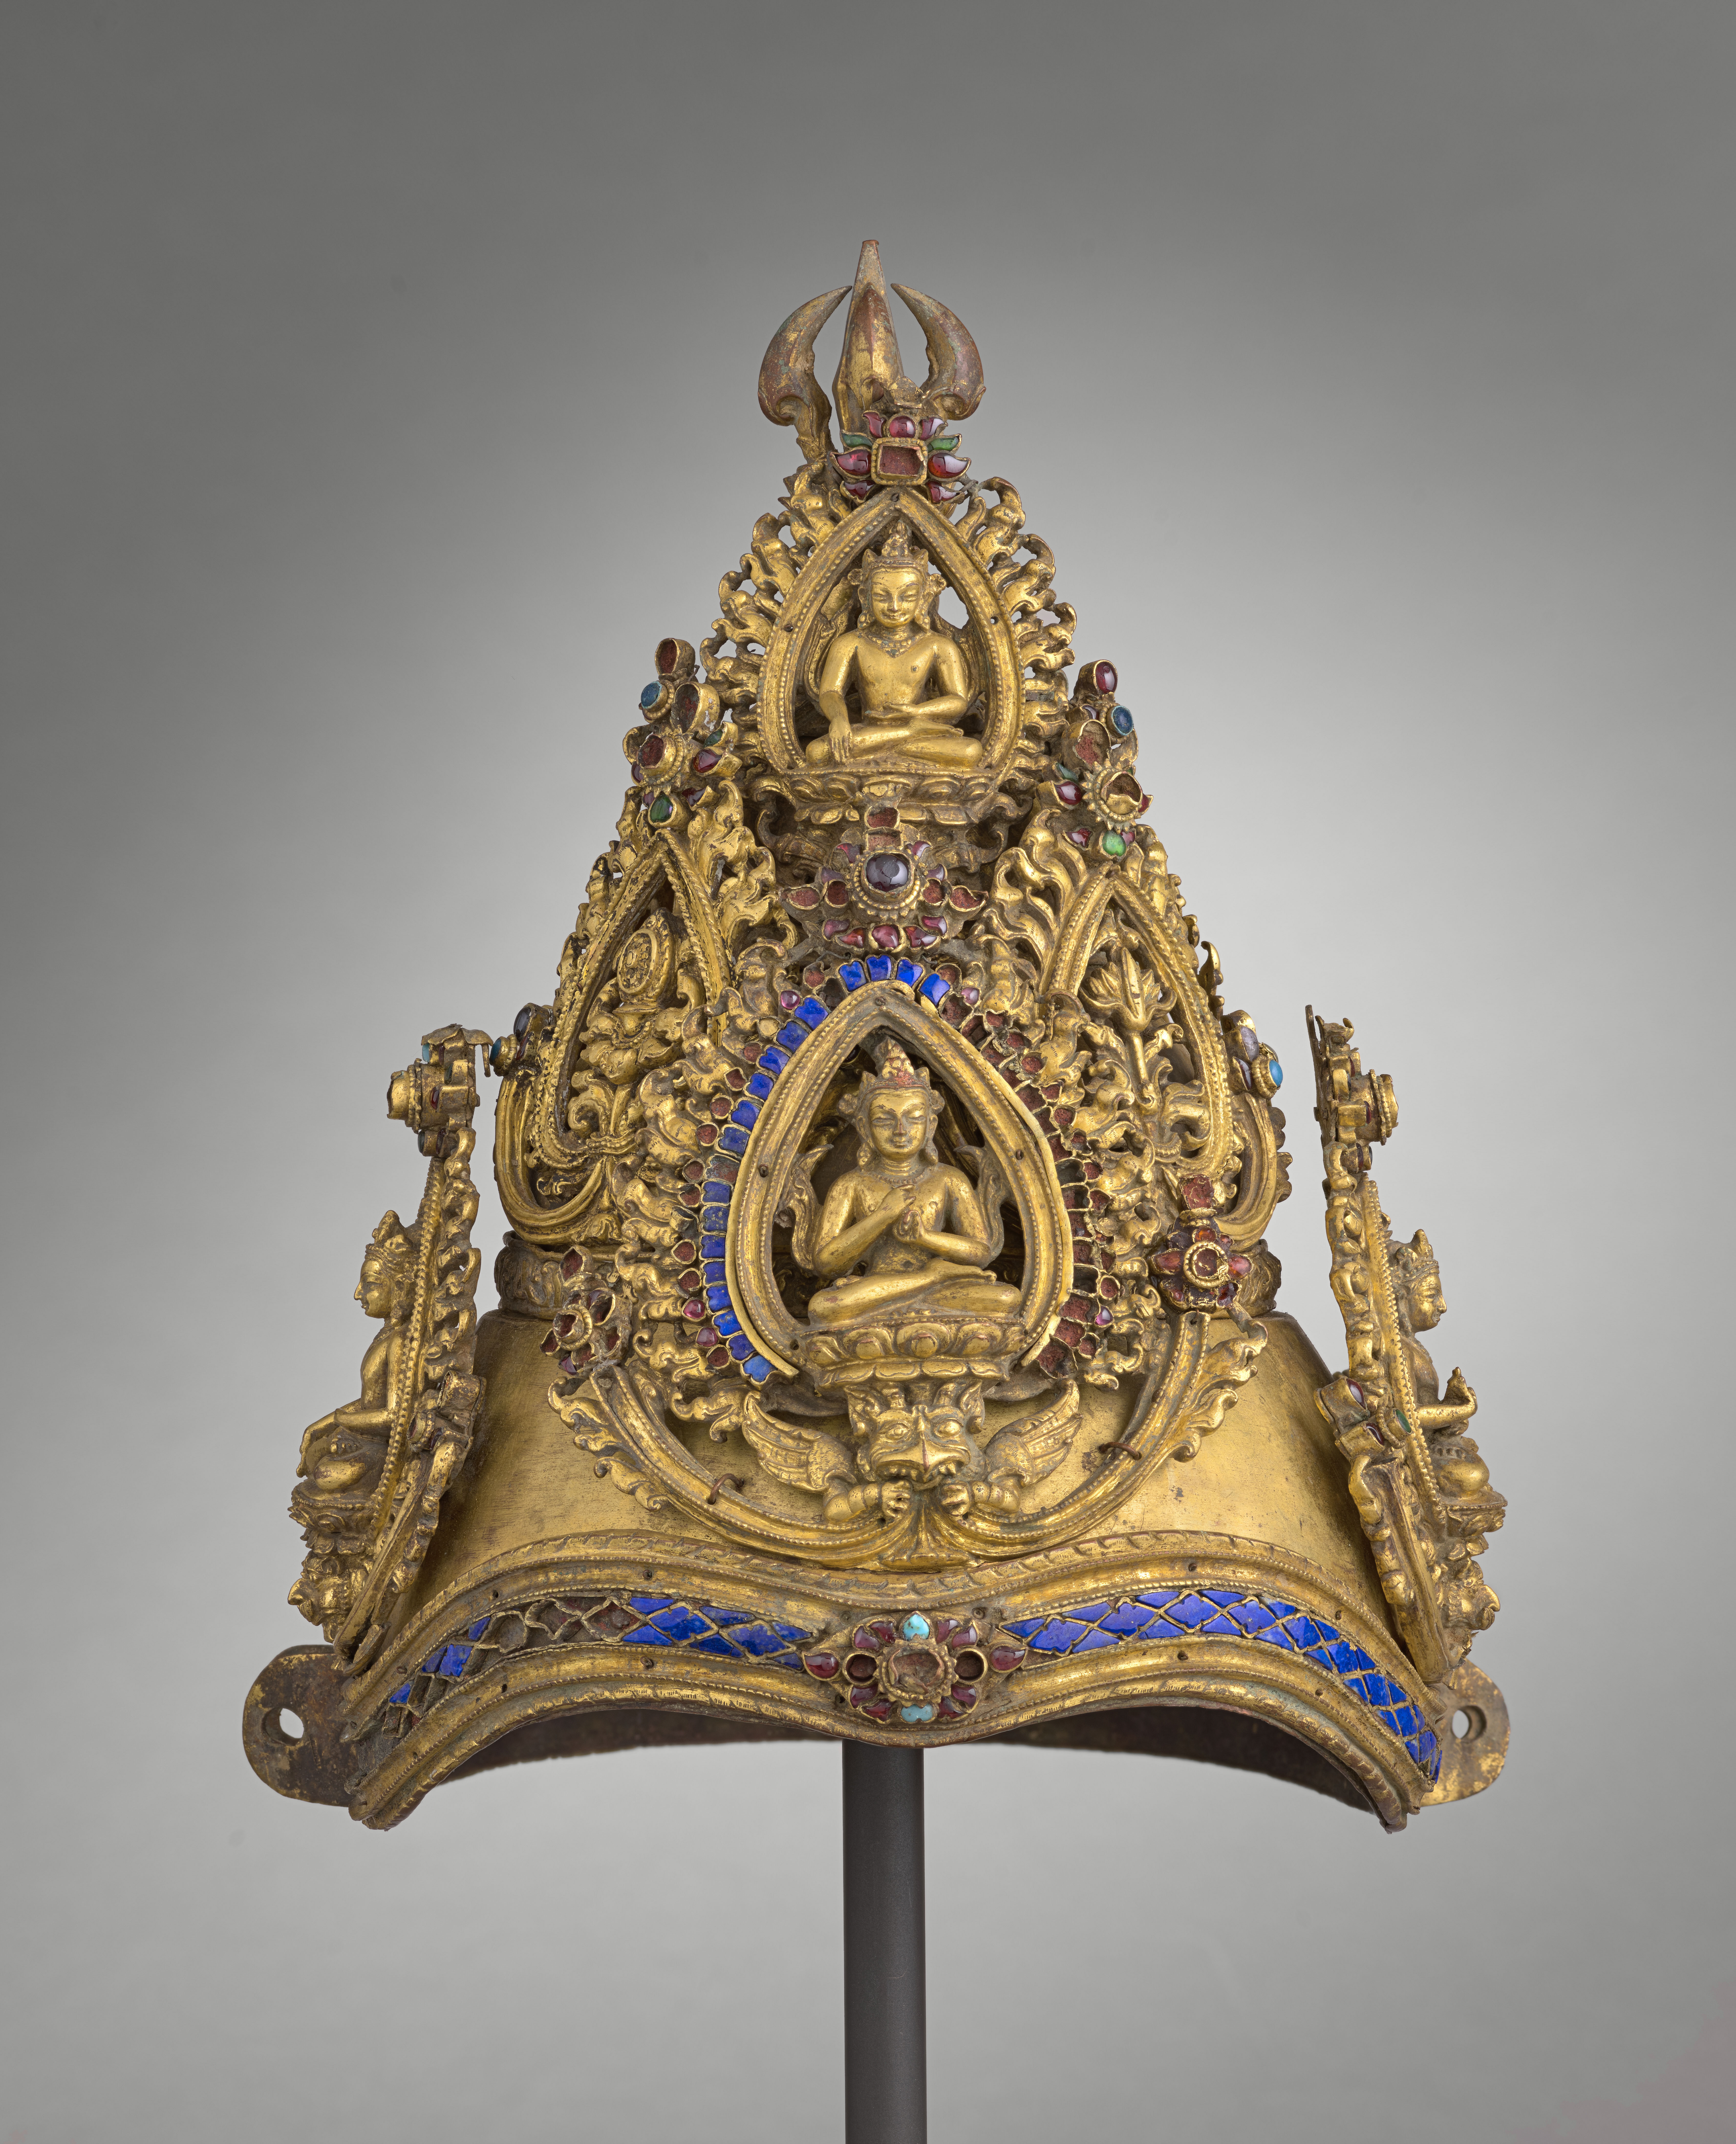 Golden, conical crown embellished with filigreed medallions, deities, scrollwork, blue stone inlay, and vajra at top